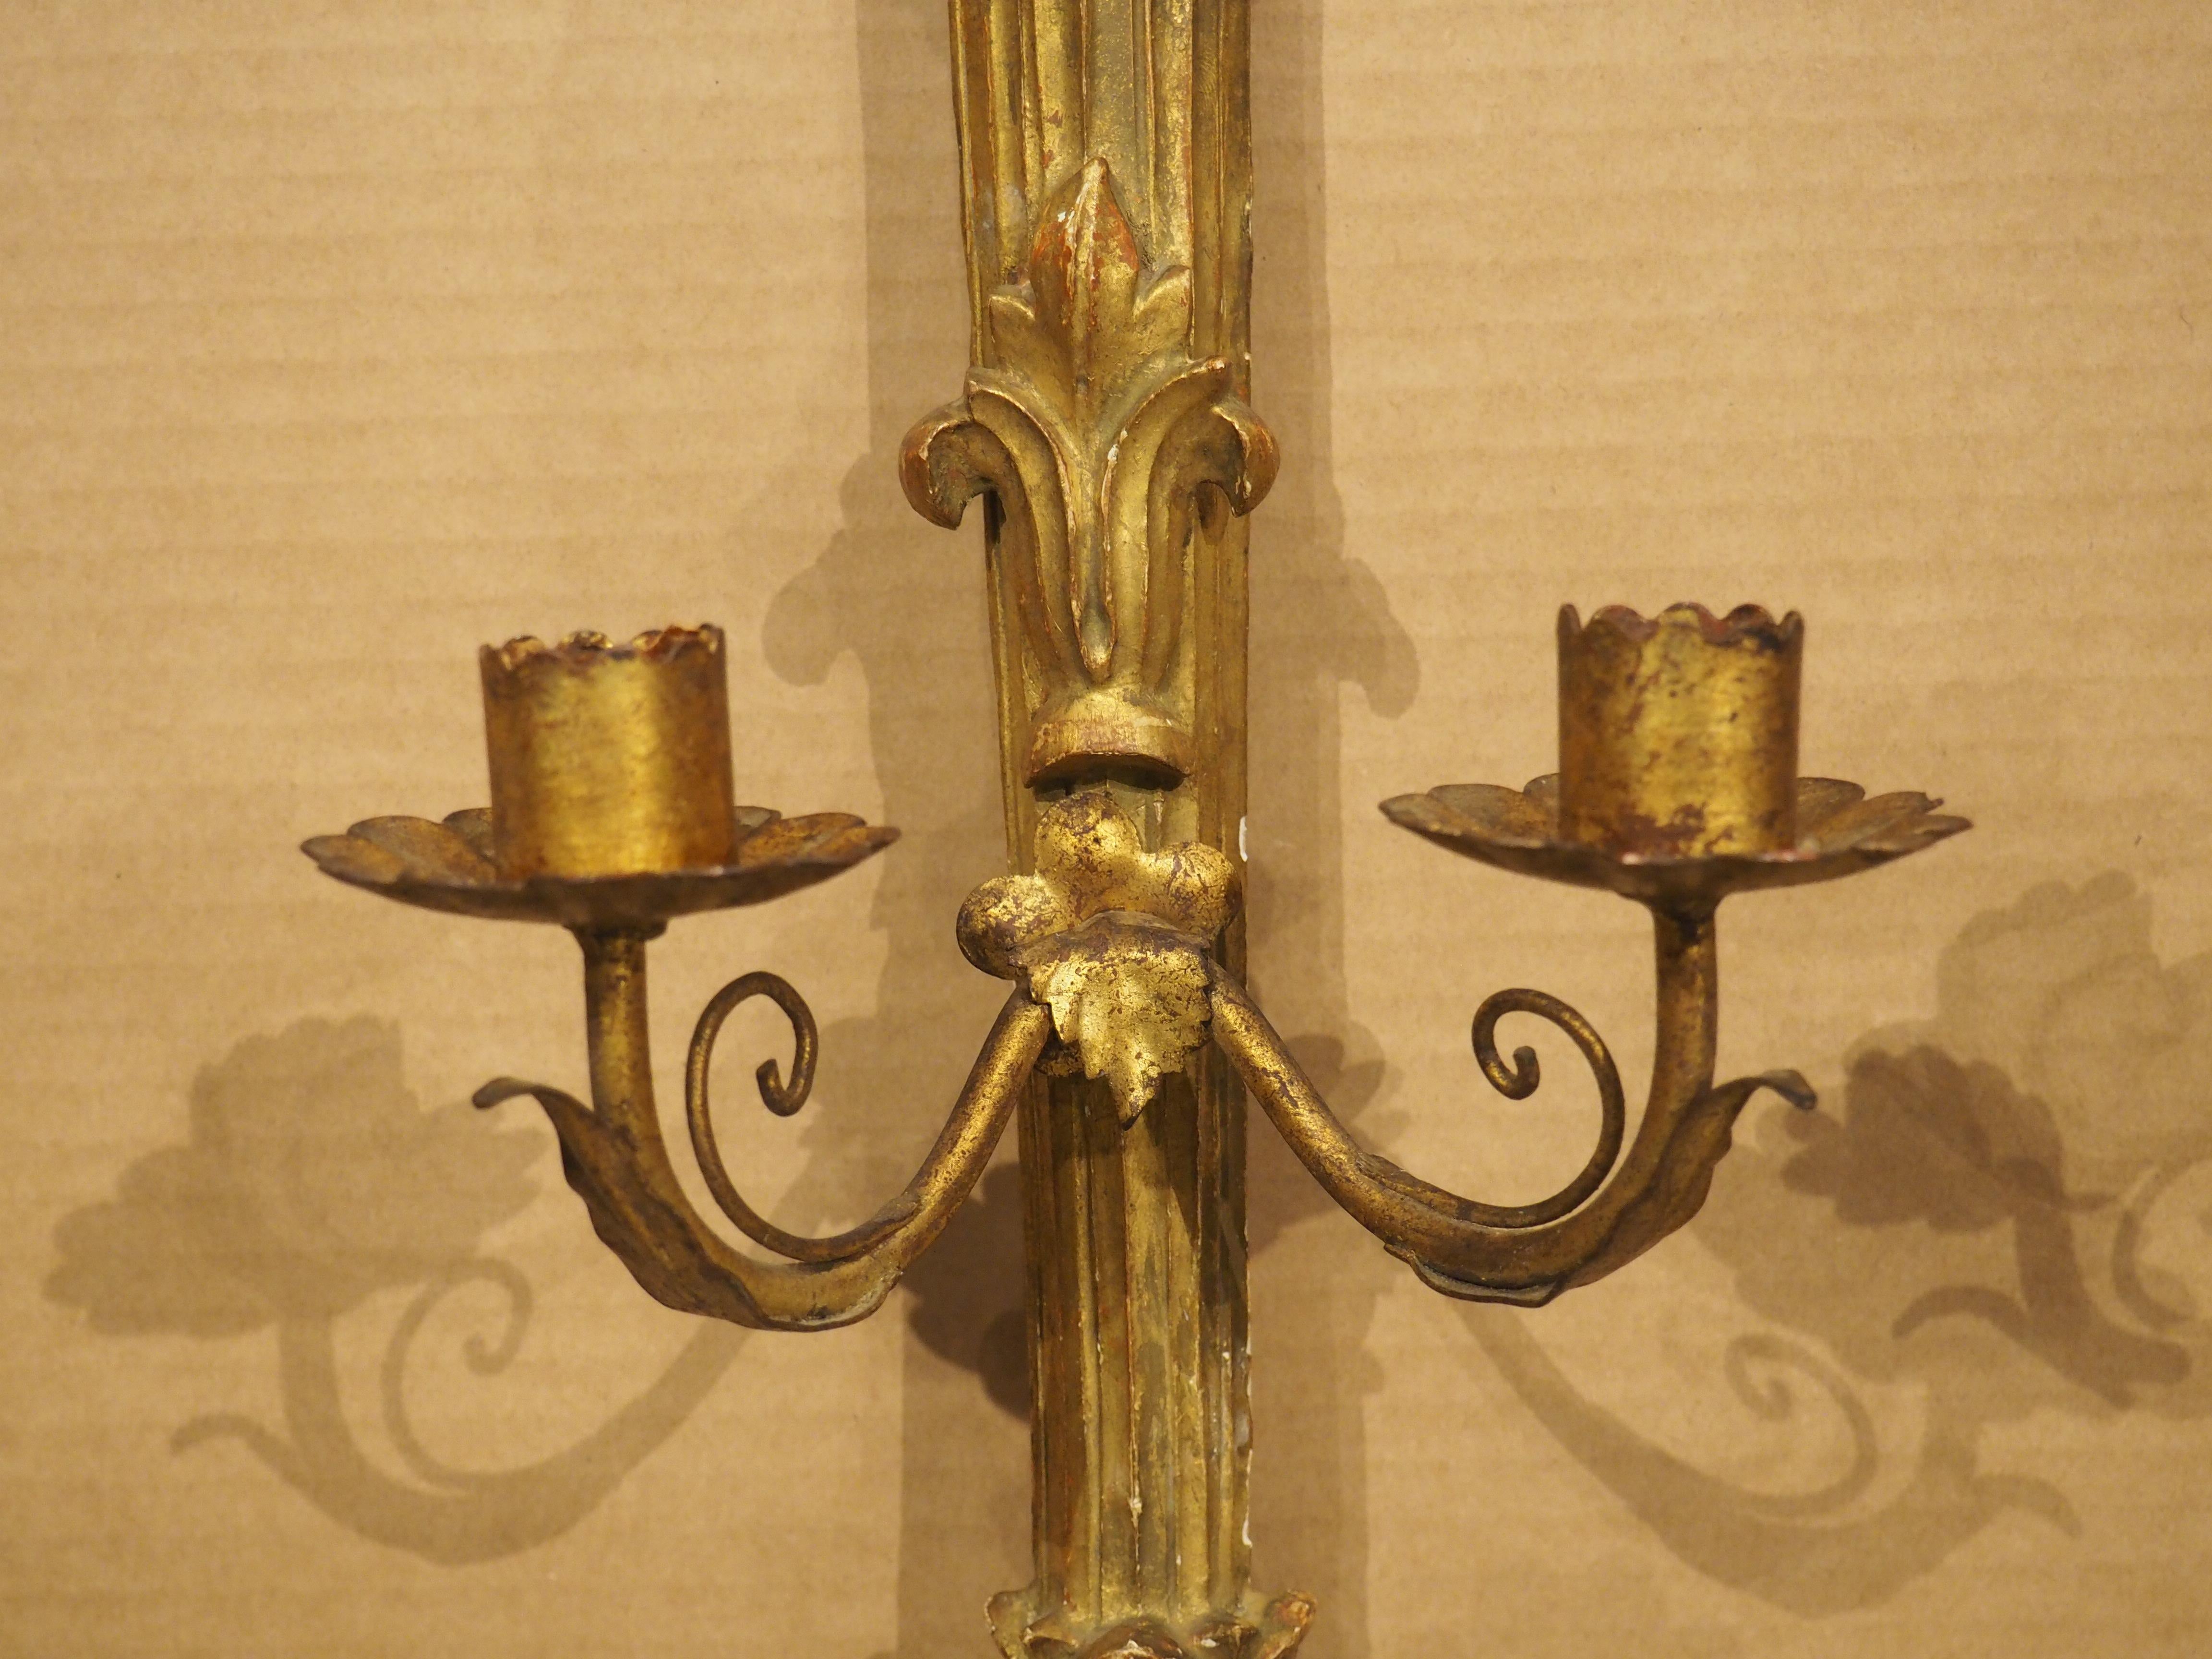 Pair of French Empire Period Giltwood Eagle Sconces, Circa 1815 For Sale 3